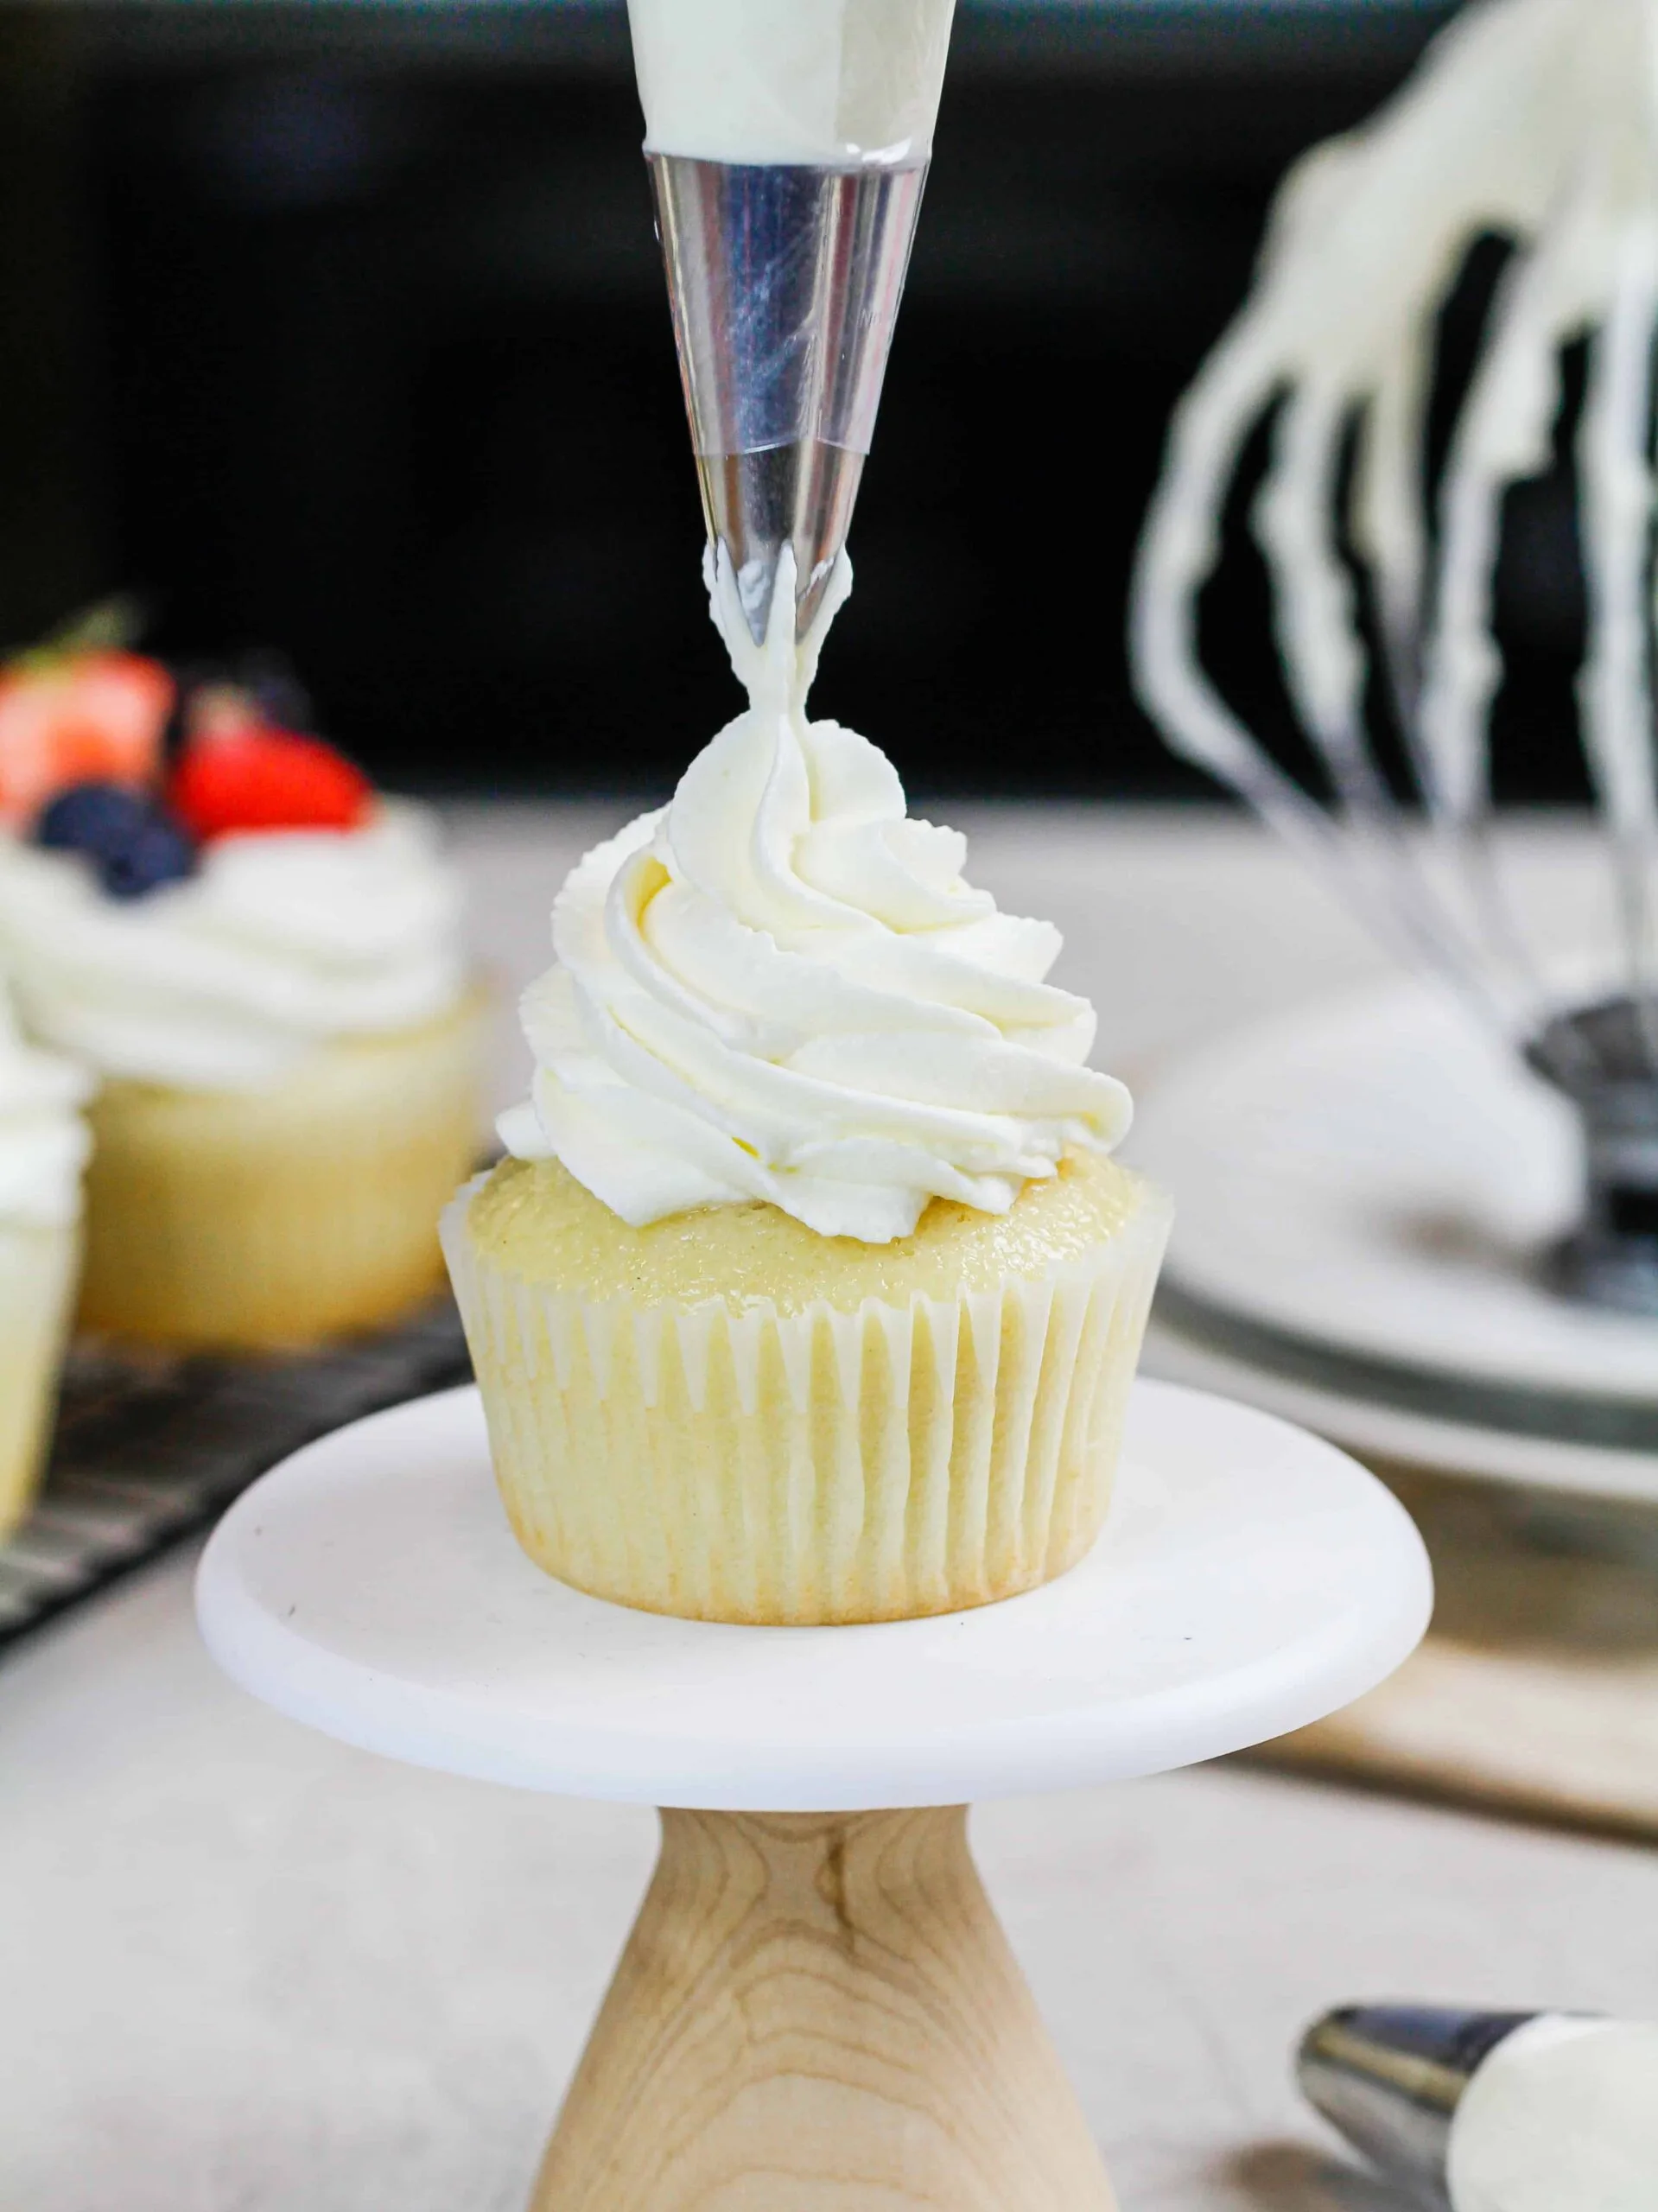 image of mascarpone cream being piped onto a cupcake